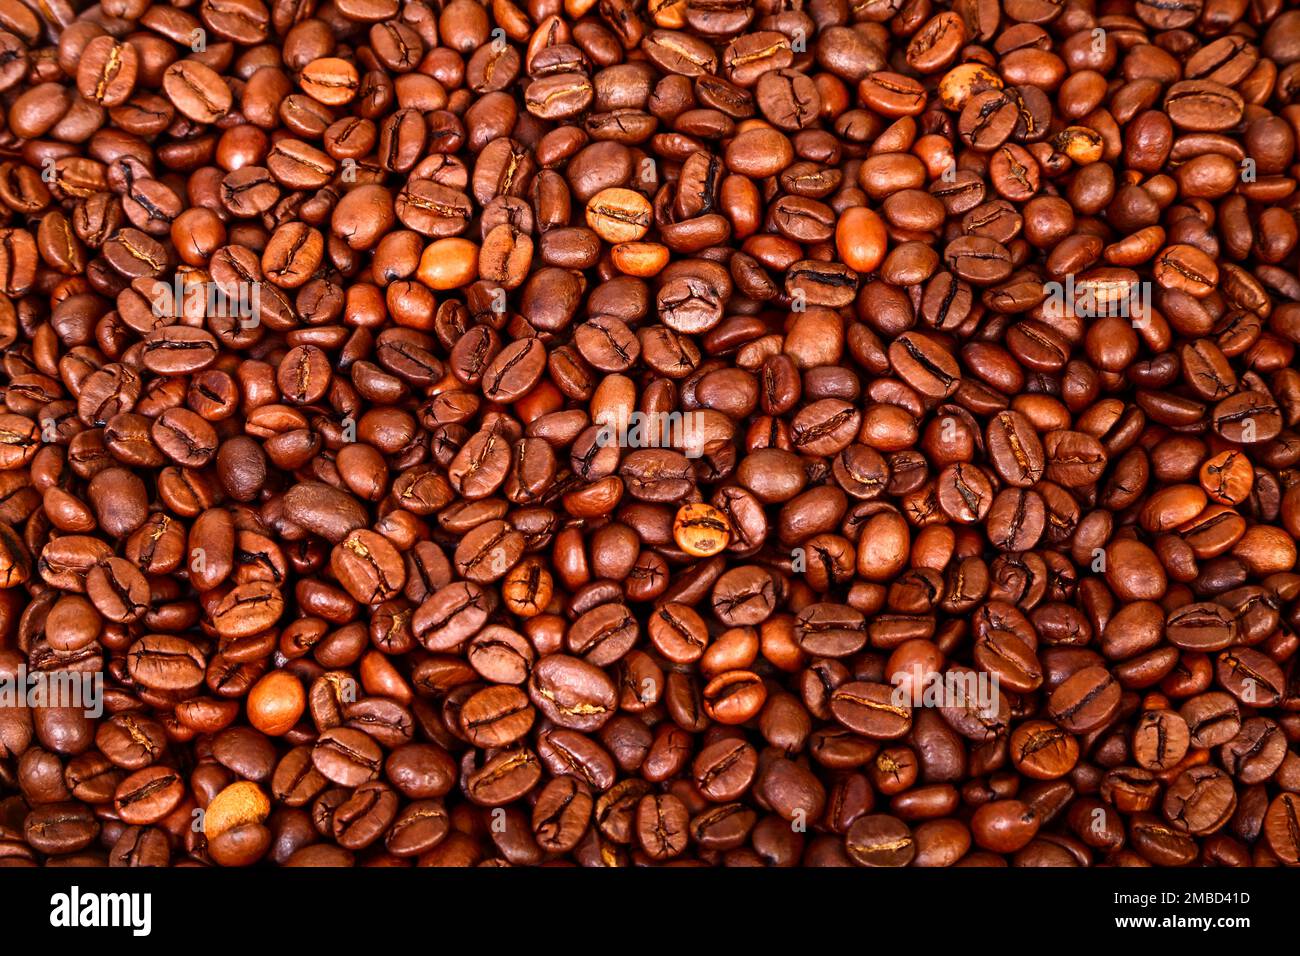 Close up macro view of espresso coffee beans Stock Photo